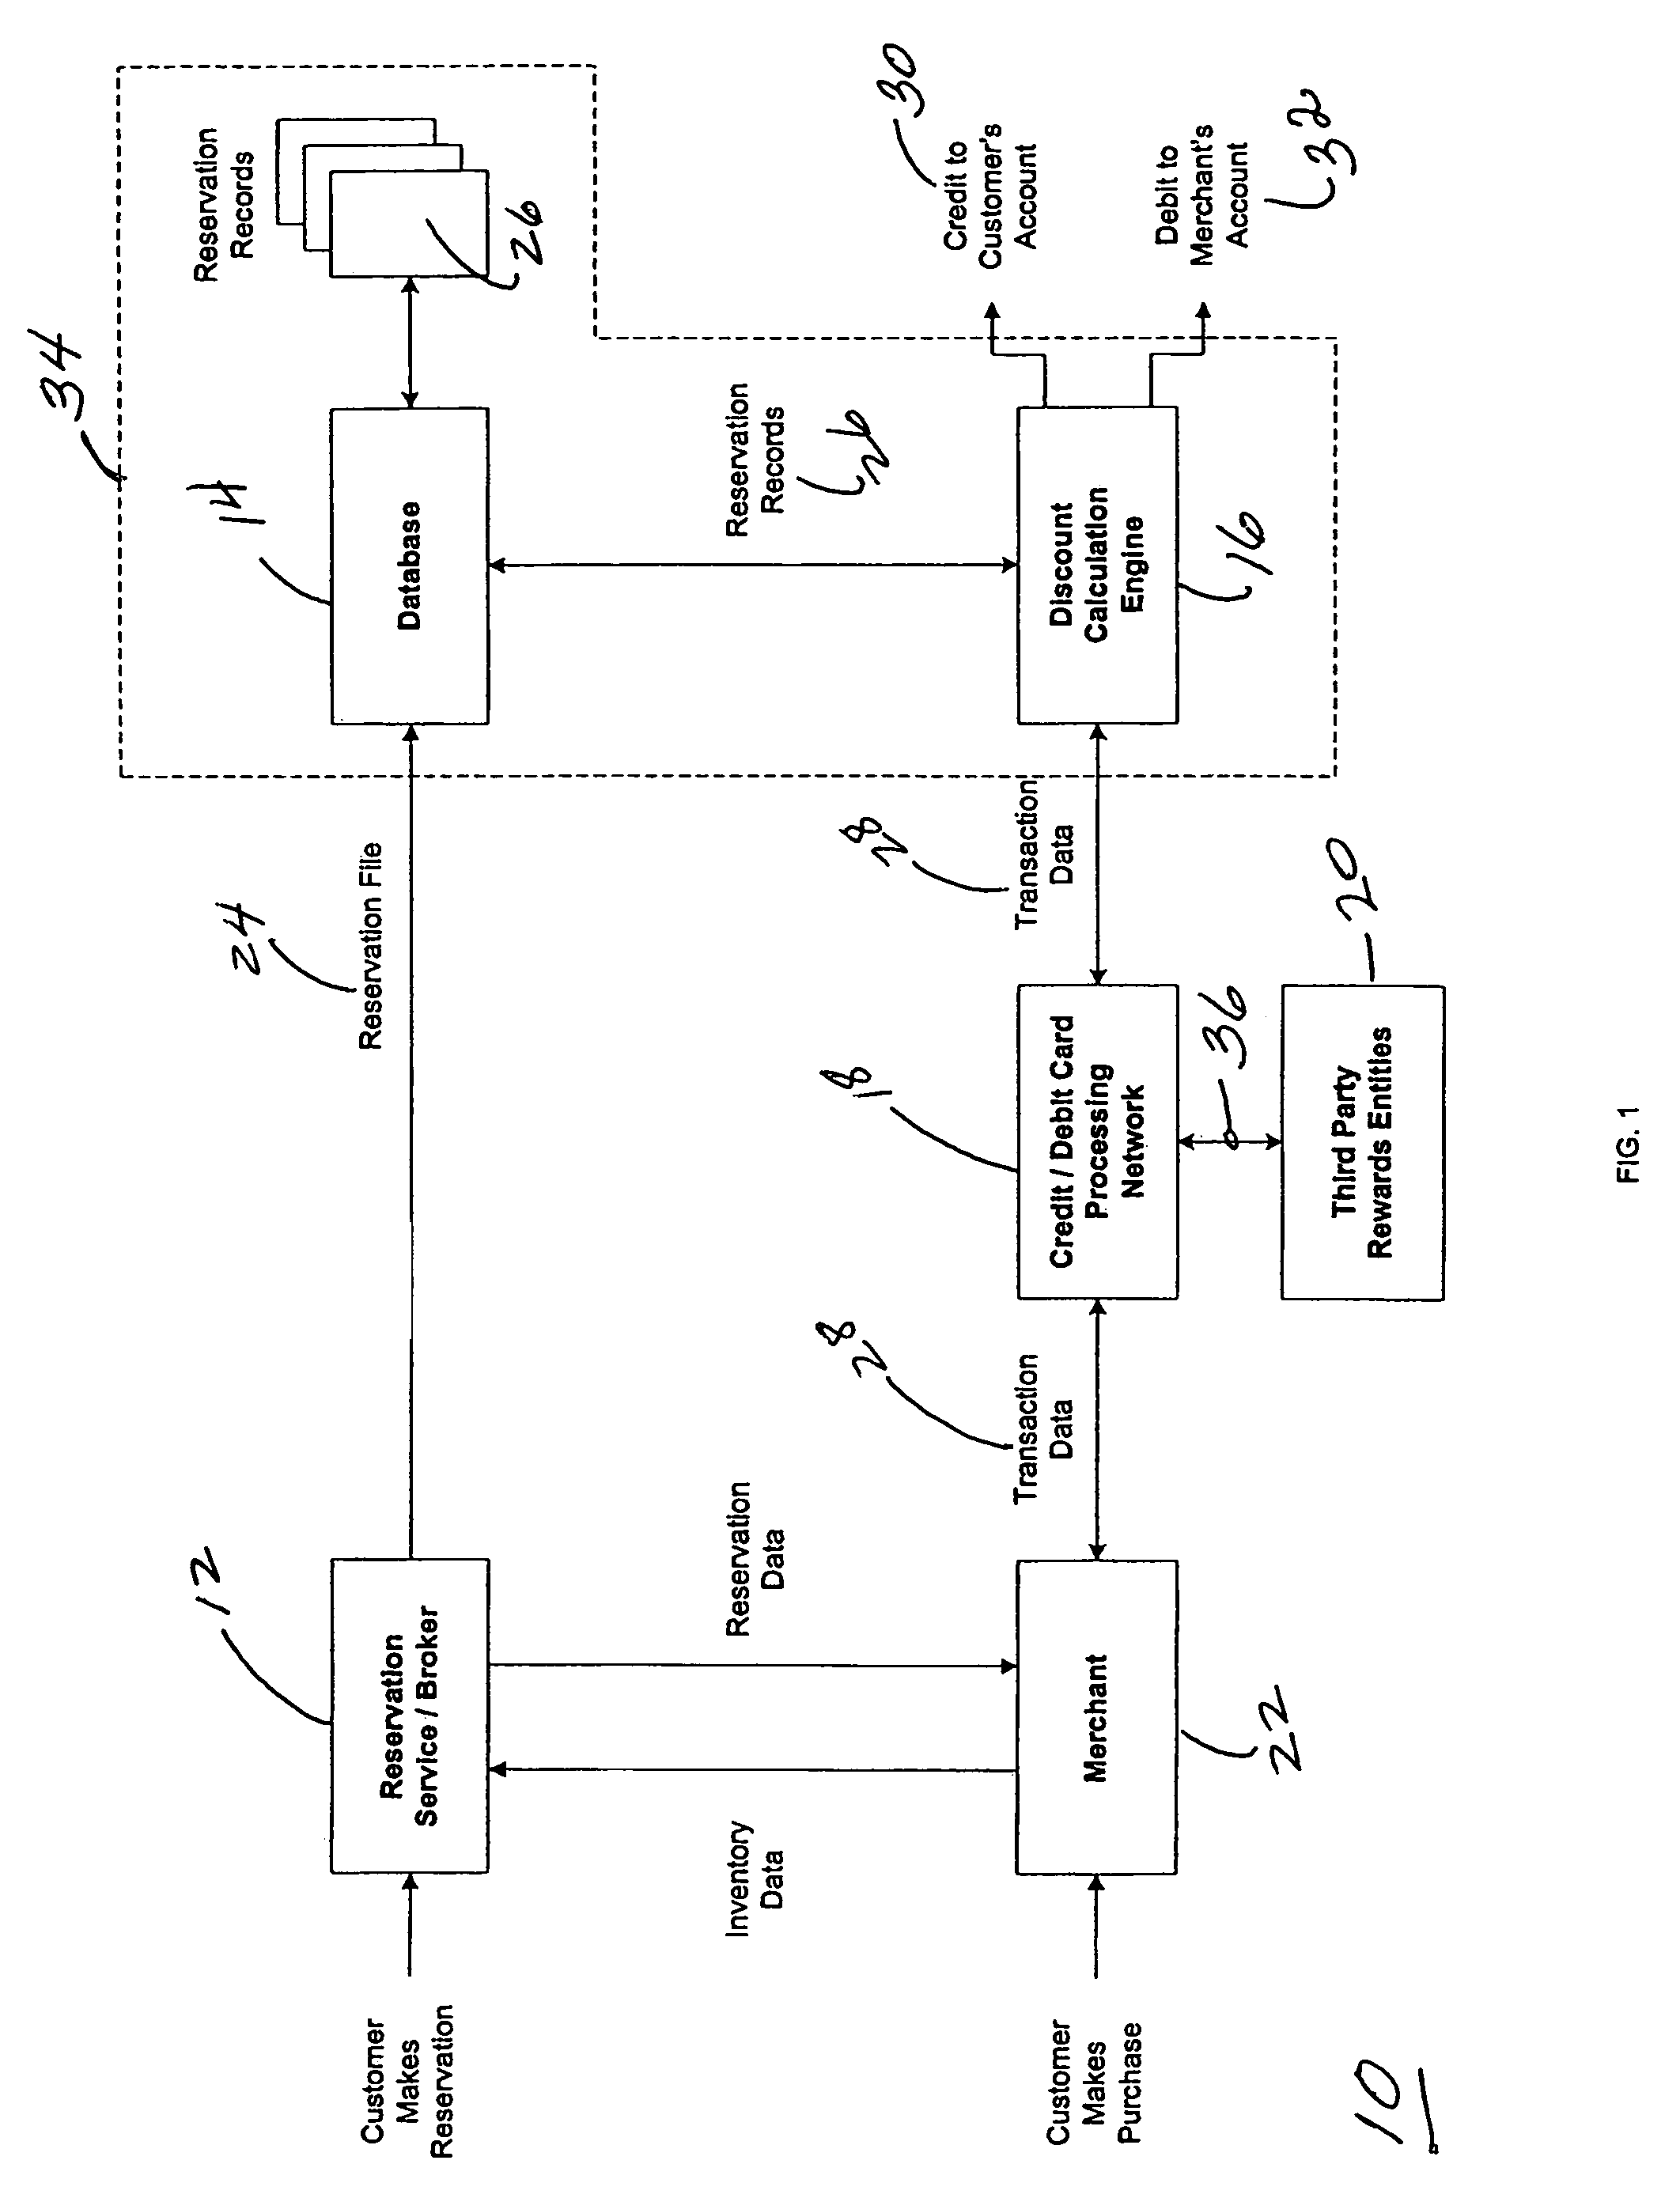 System, apparatus and methods for automatically calculating discounts for purchases from merchants made using a reservation system